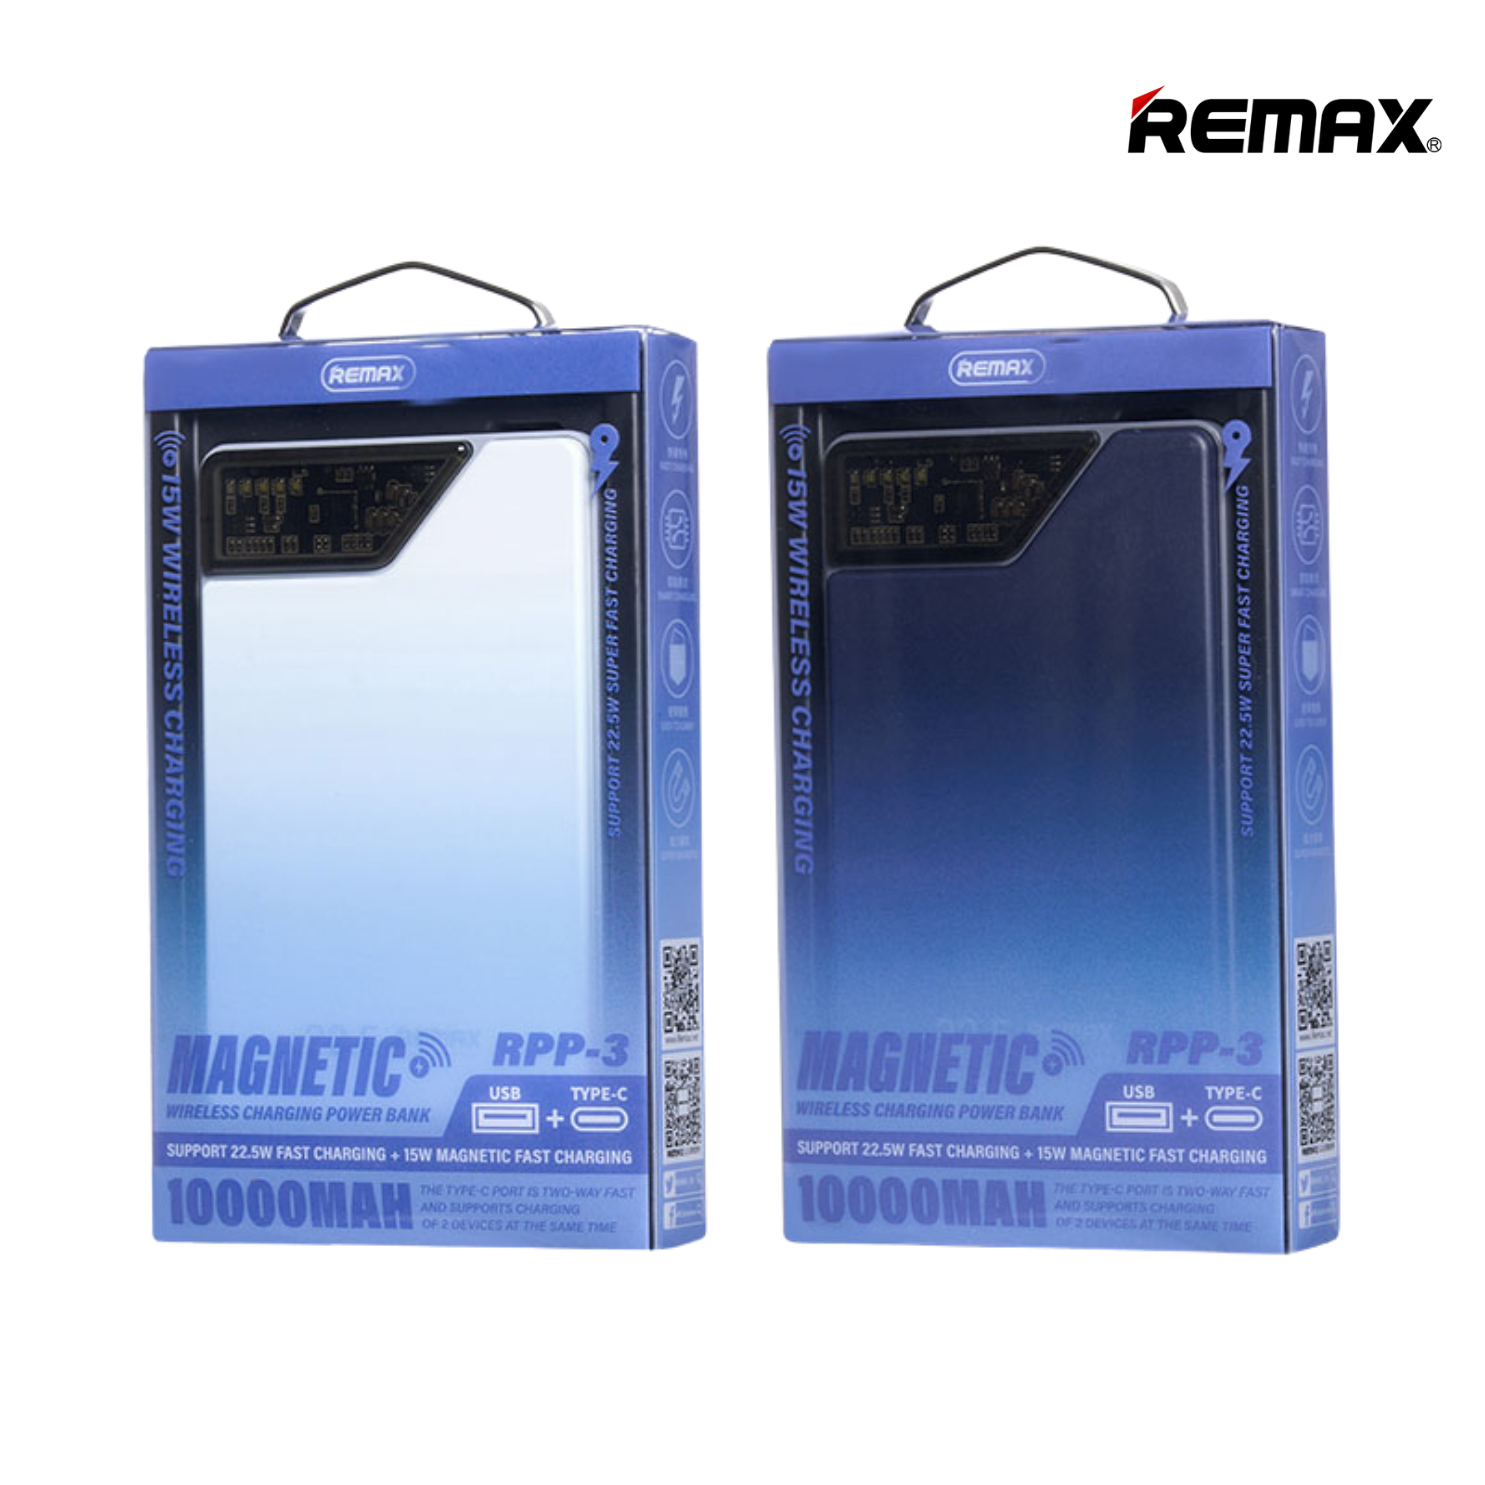 REMAX RPP-3 10000mAh Vocard Series 20W+22.5W PD+QC Magnetic Wireless Charging Power Bank - Blue